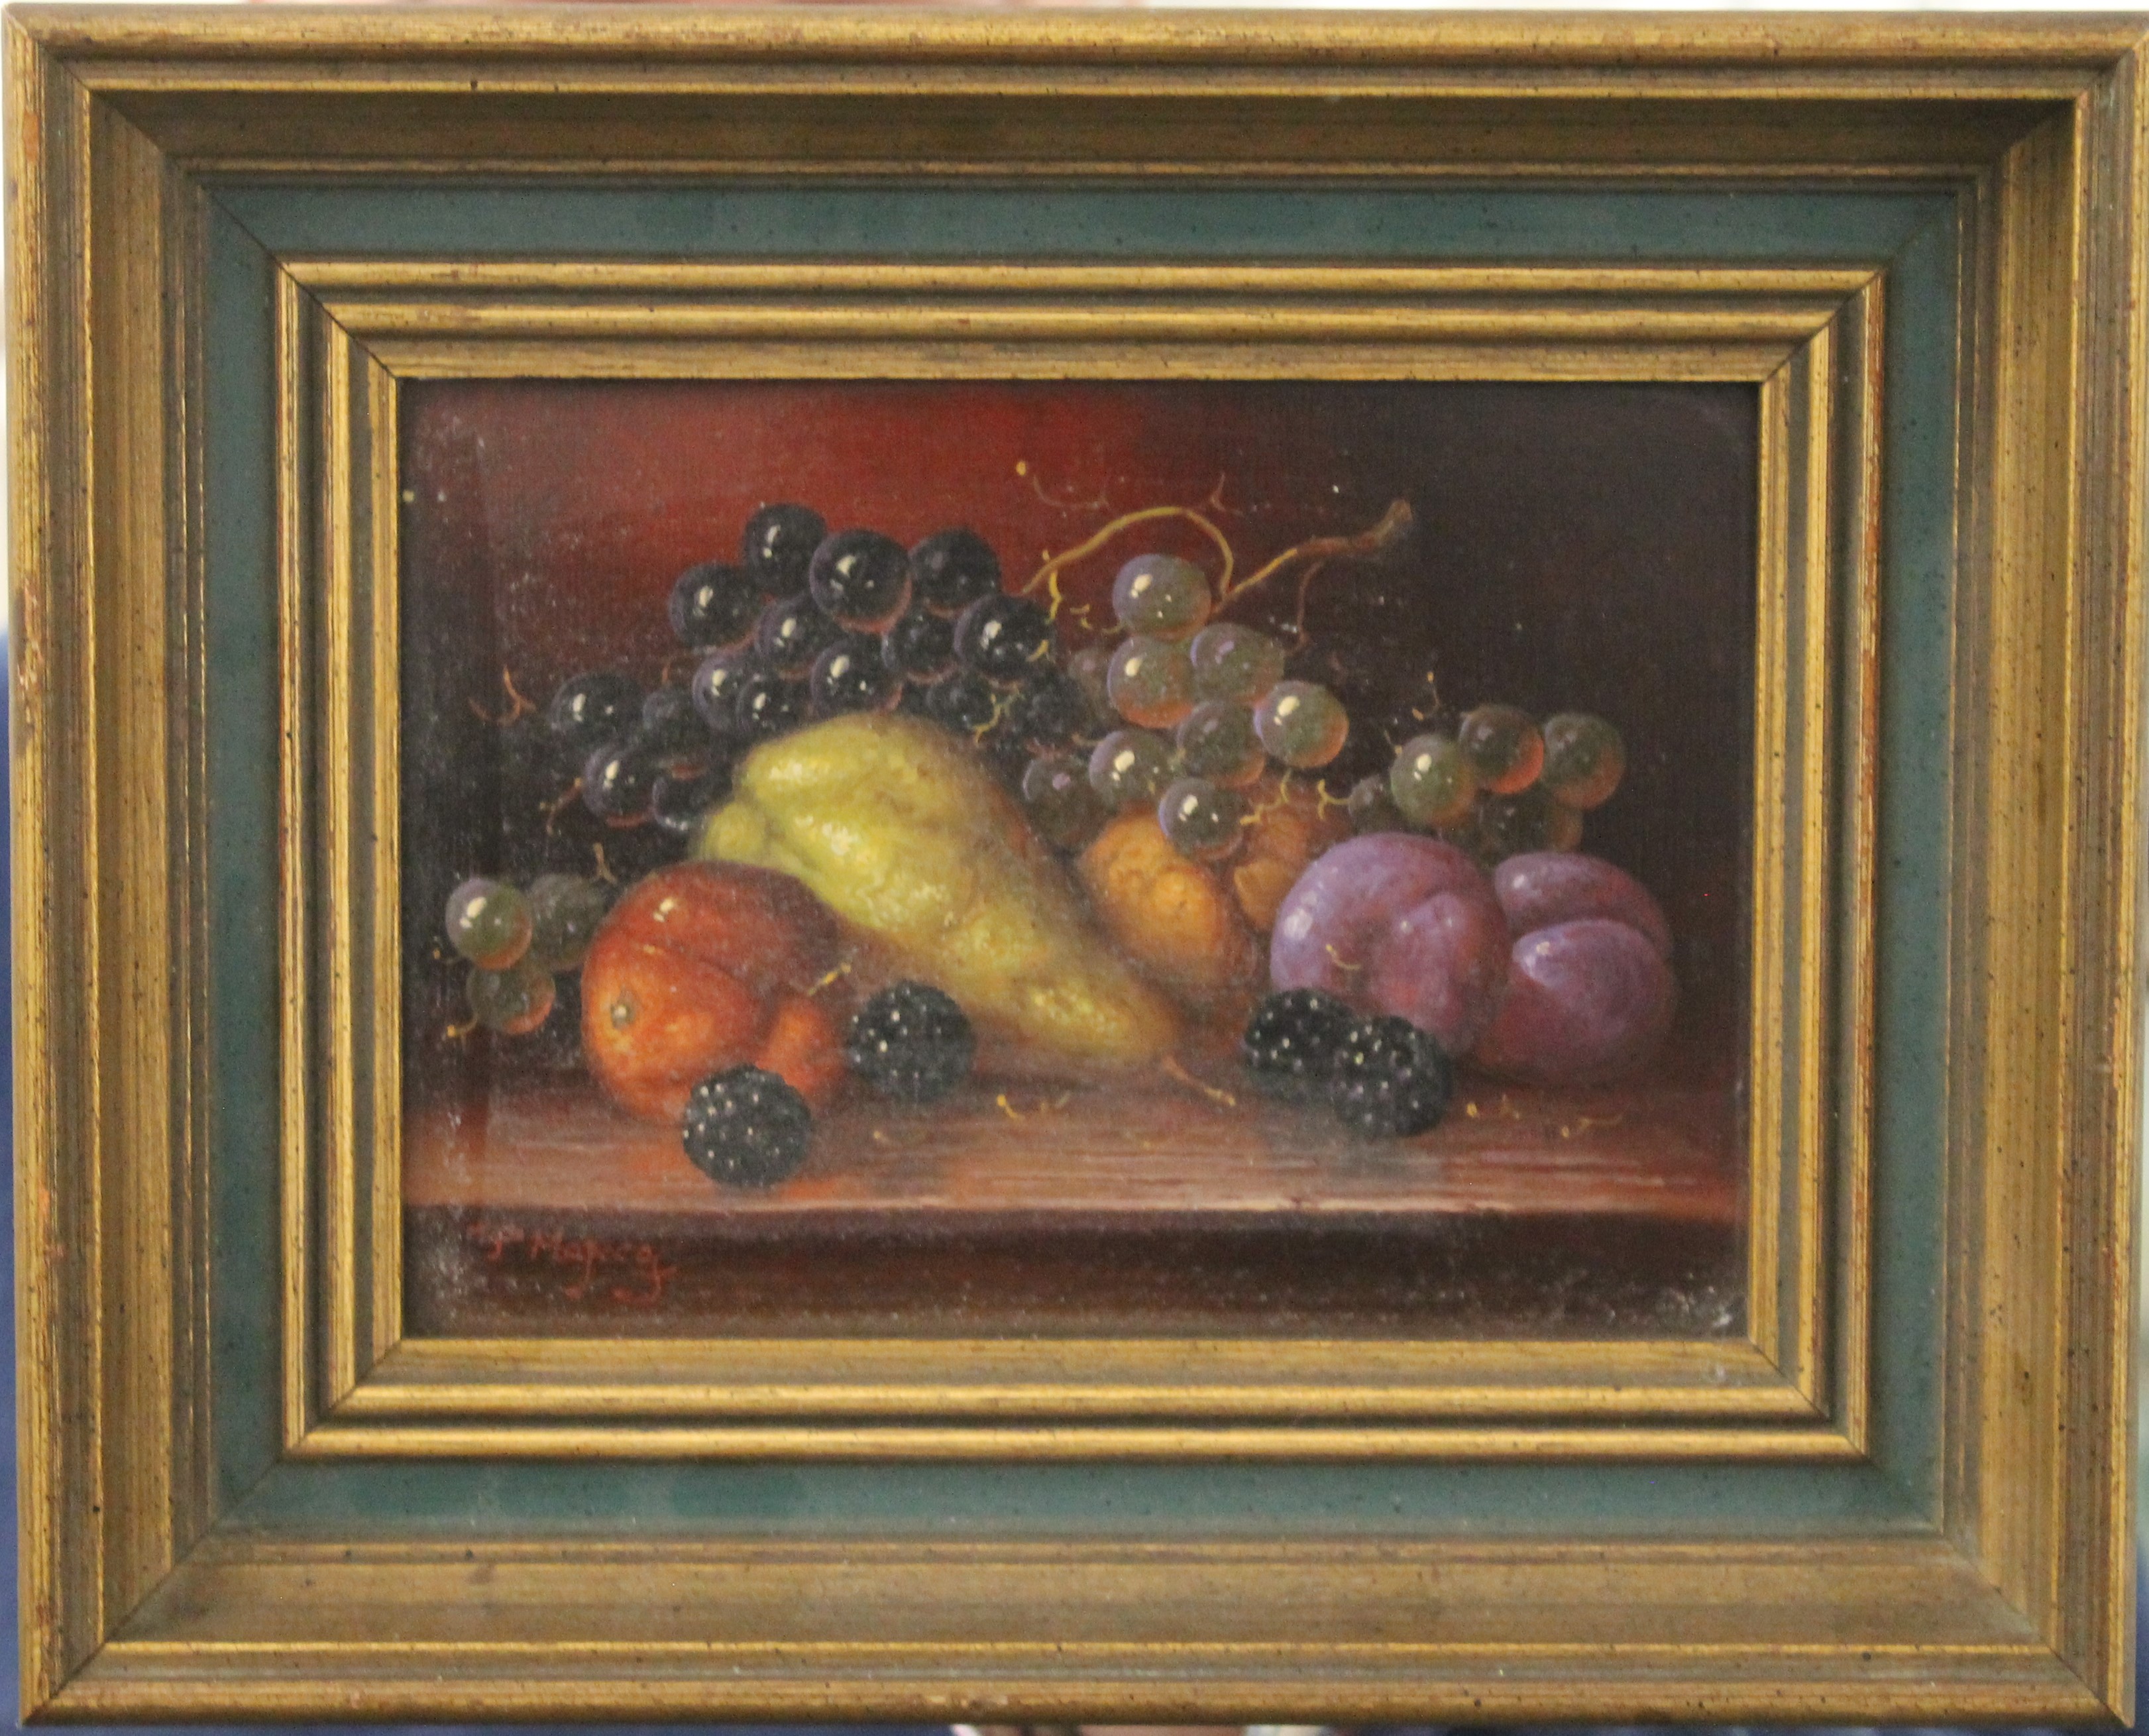 B GILLESPIE, Still Life of Apples, watercolour, signed and dated 1991, framed and glazed. 28.5 x 23. - Image 4 of 4